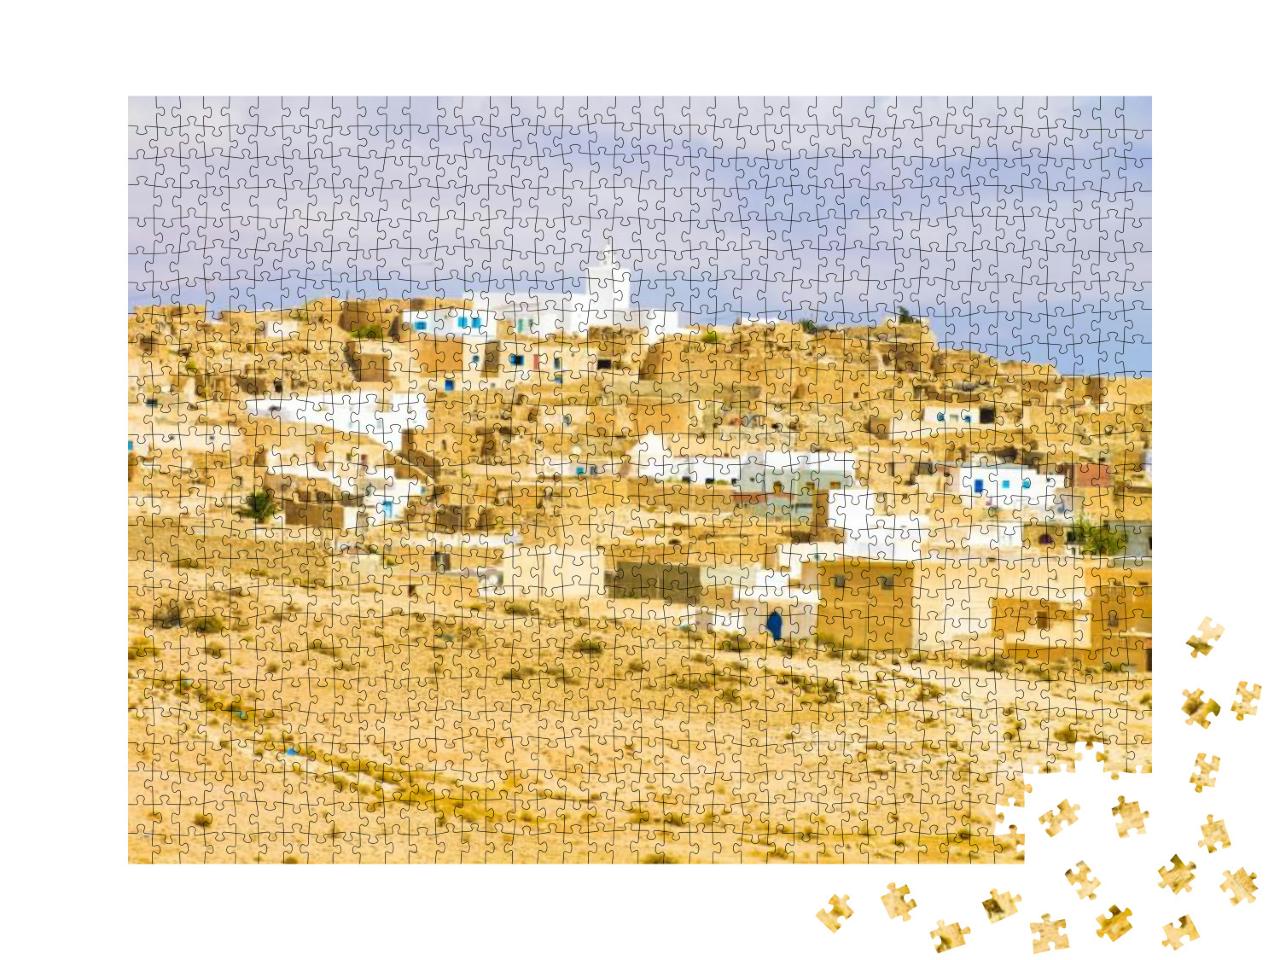 Tunisia. Village of Matmata. Landscapes of the Desert... Jigsaw Puzzle with 1000 pieces